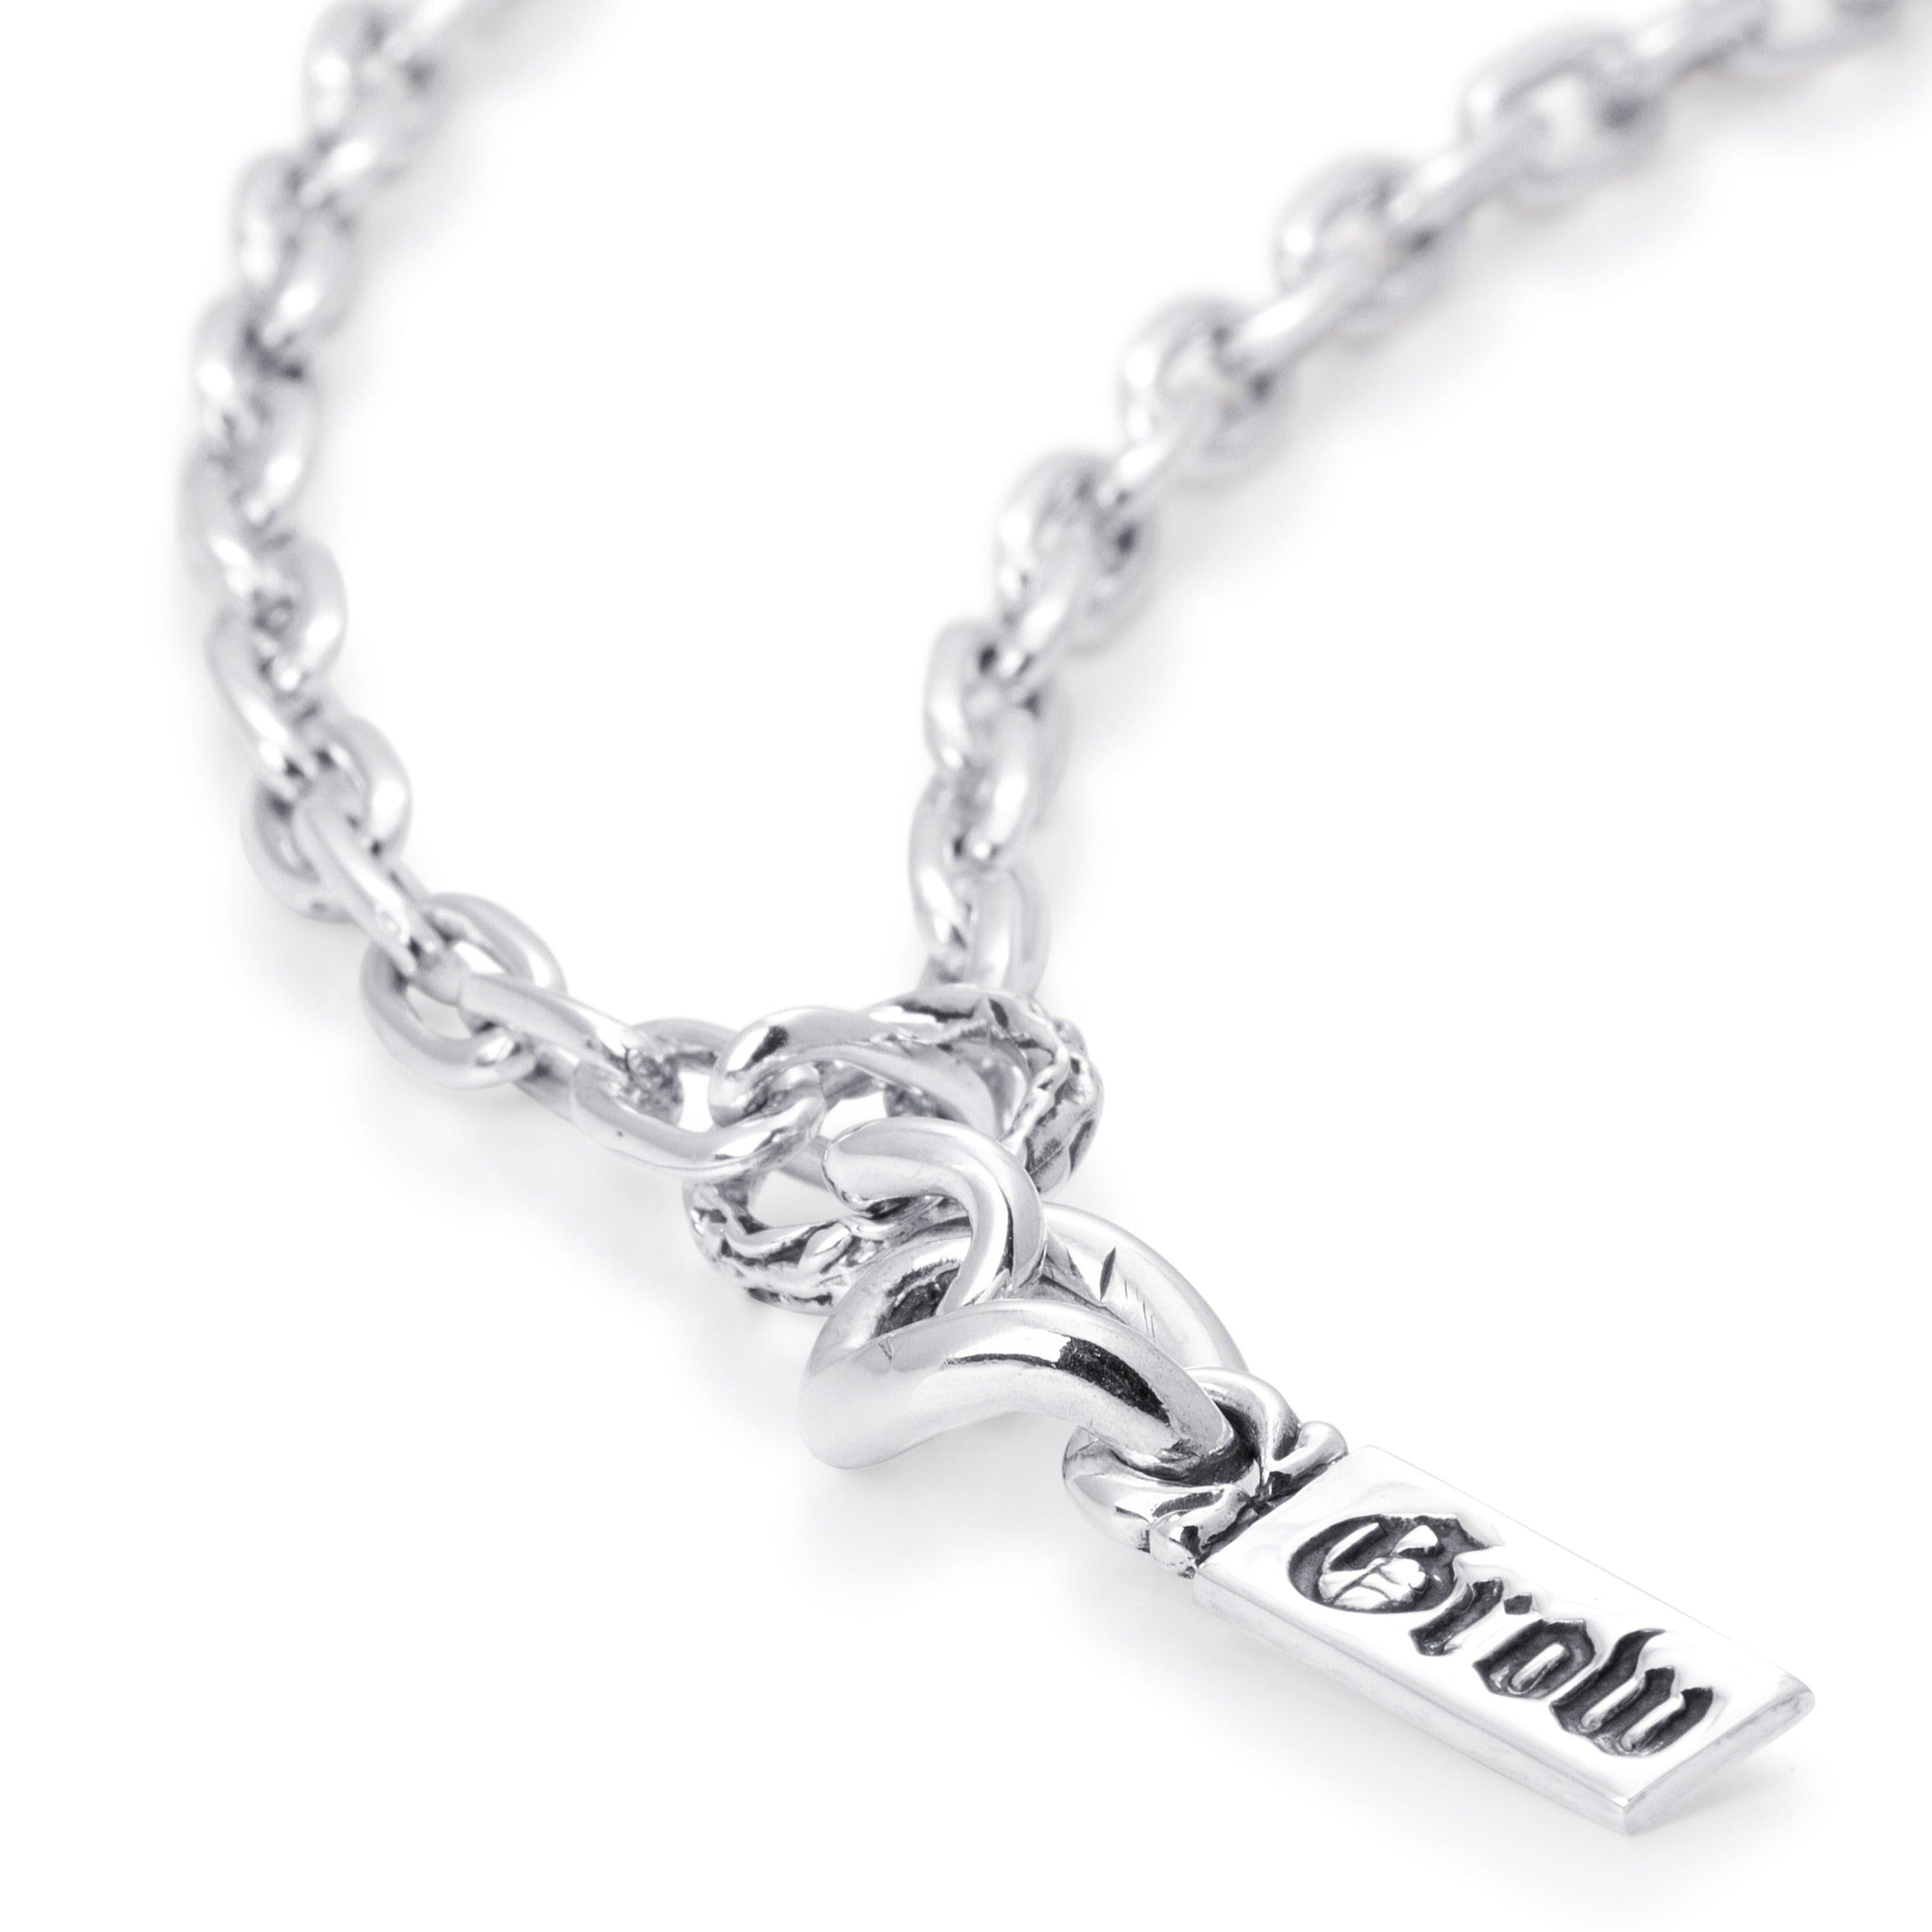 'Grow' Word Bar Pendant in Sterling Silver, 37mm